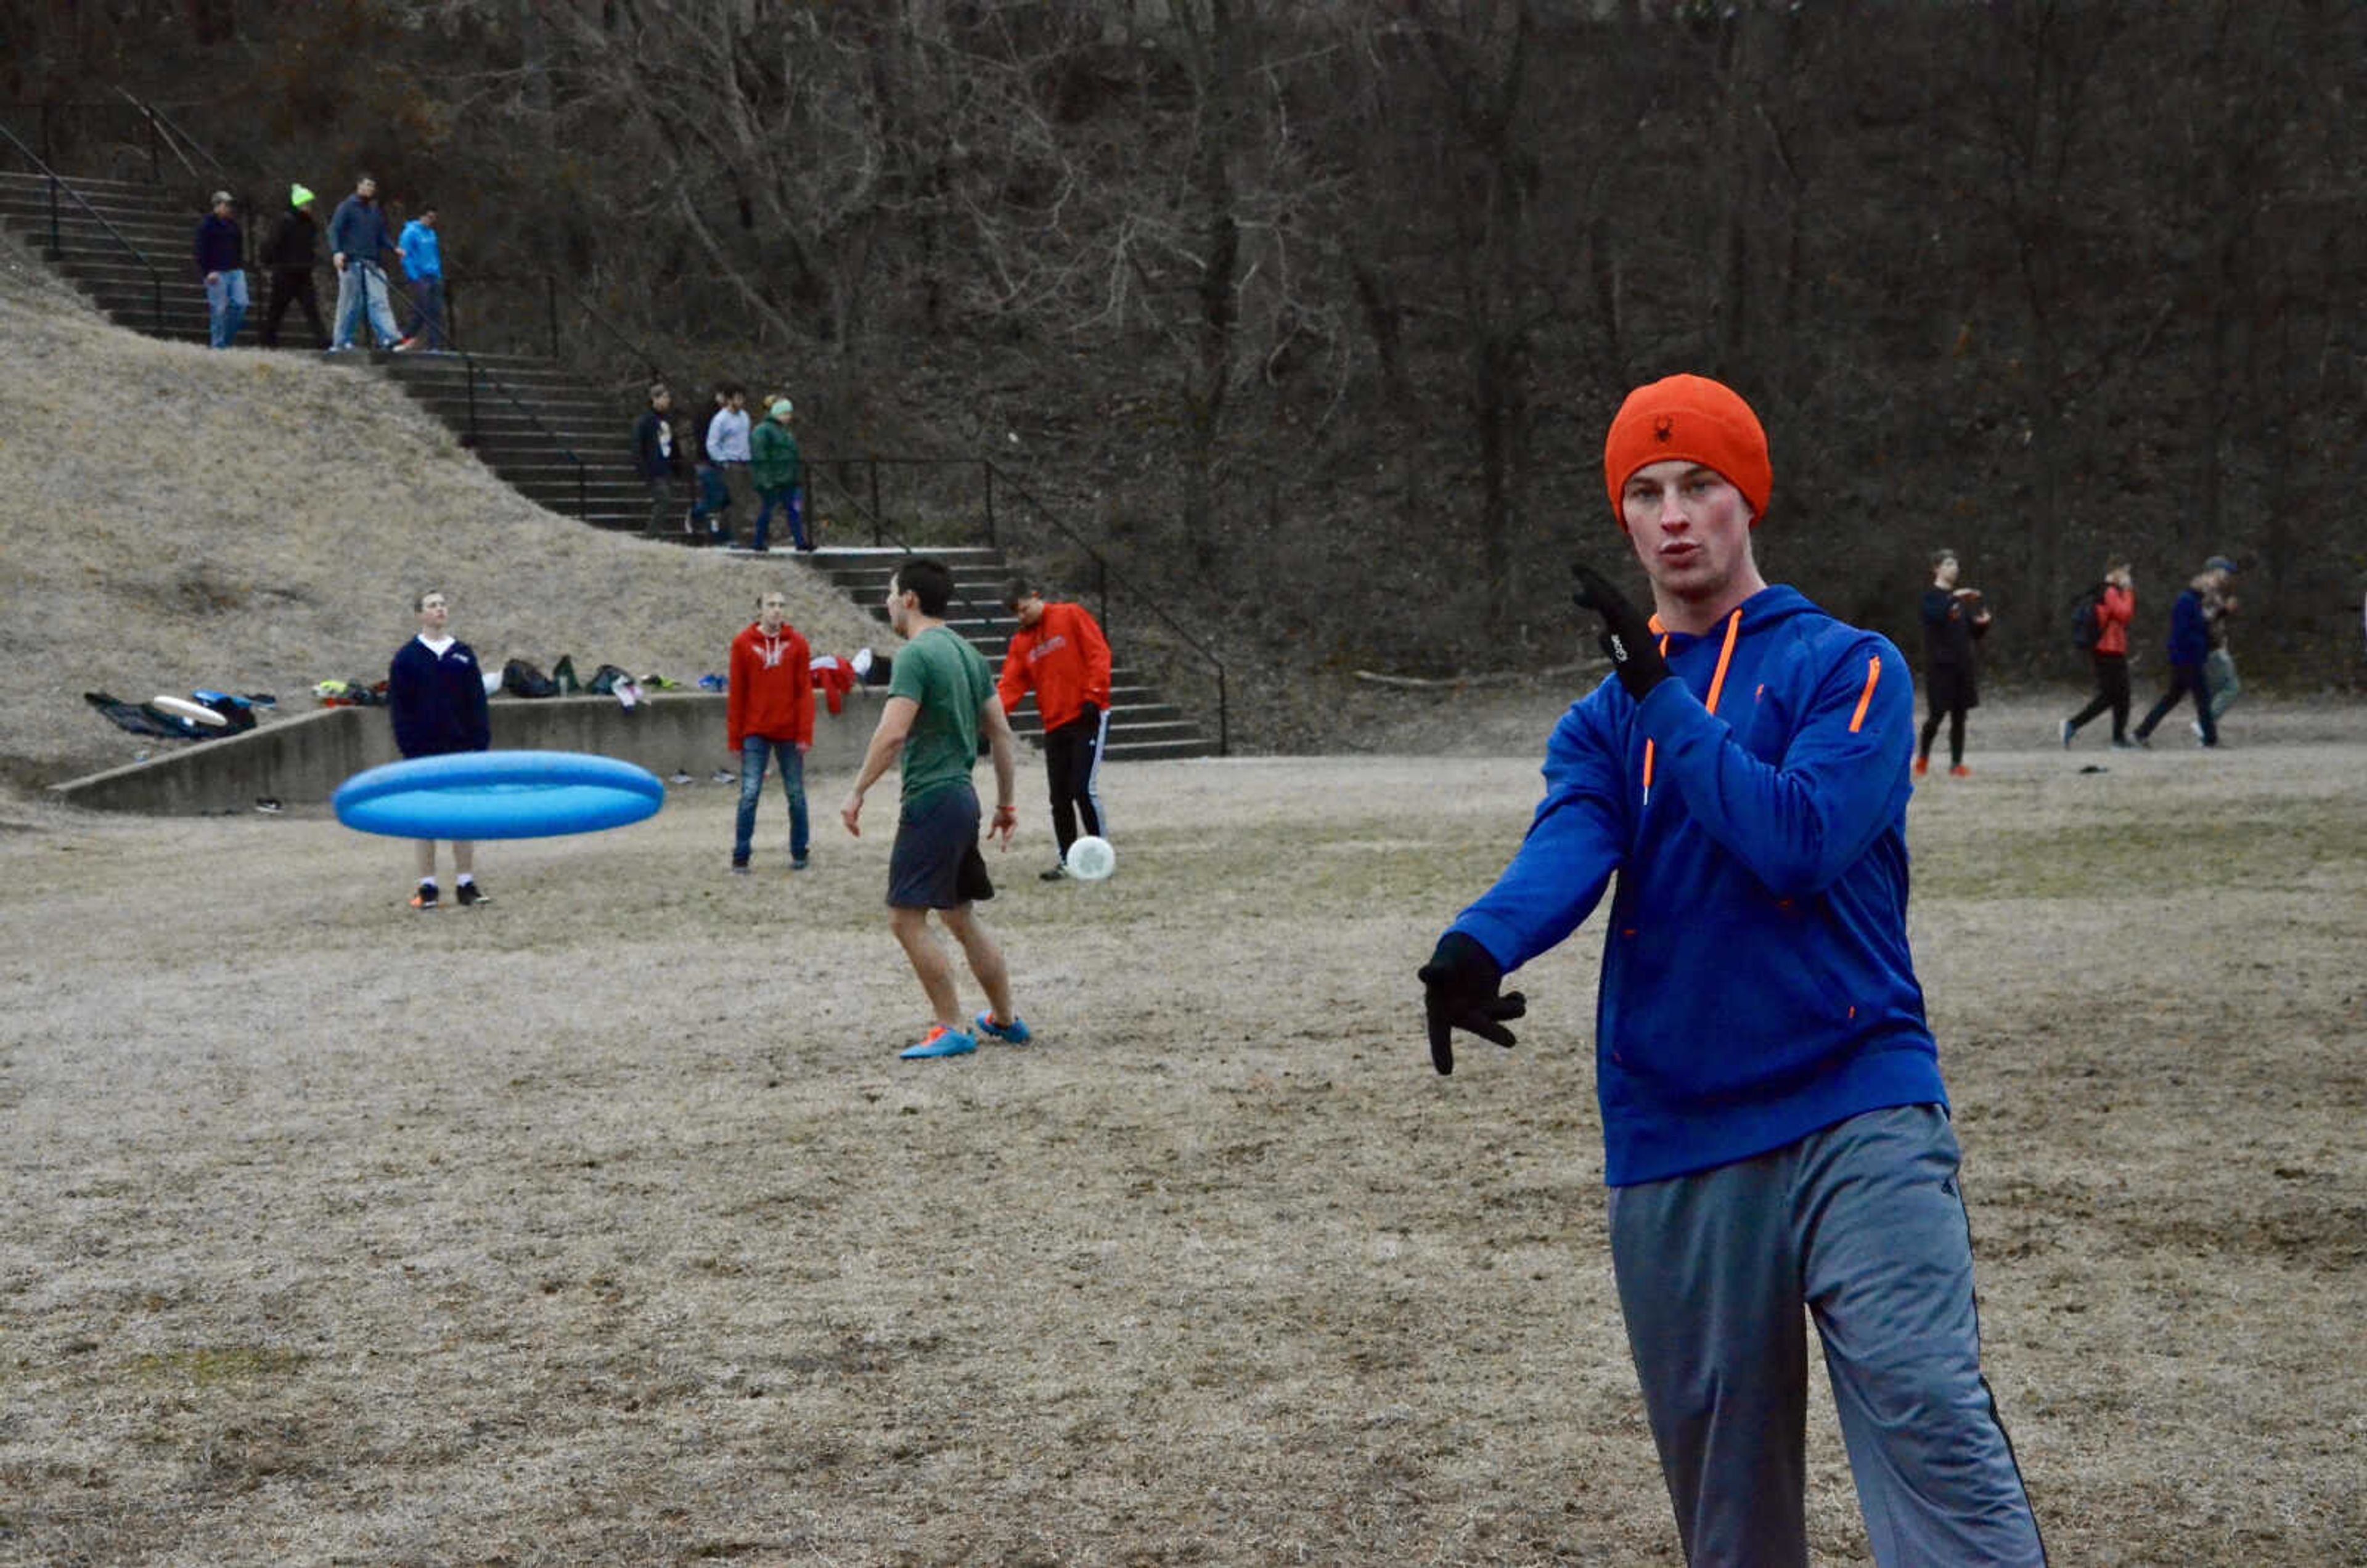 Ultimate frisbee president Connor McGough practices with his team on the old band practice field.